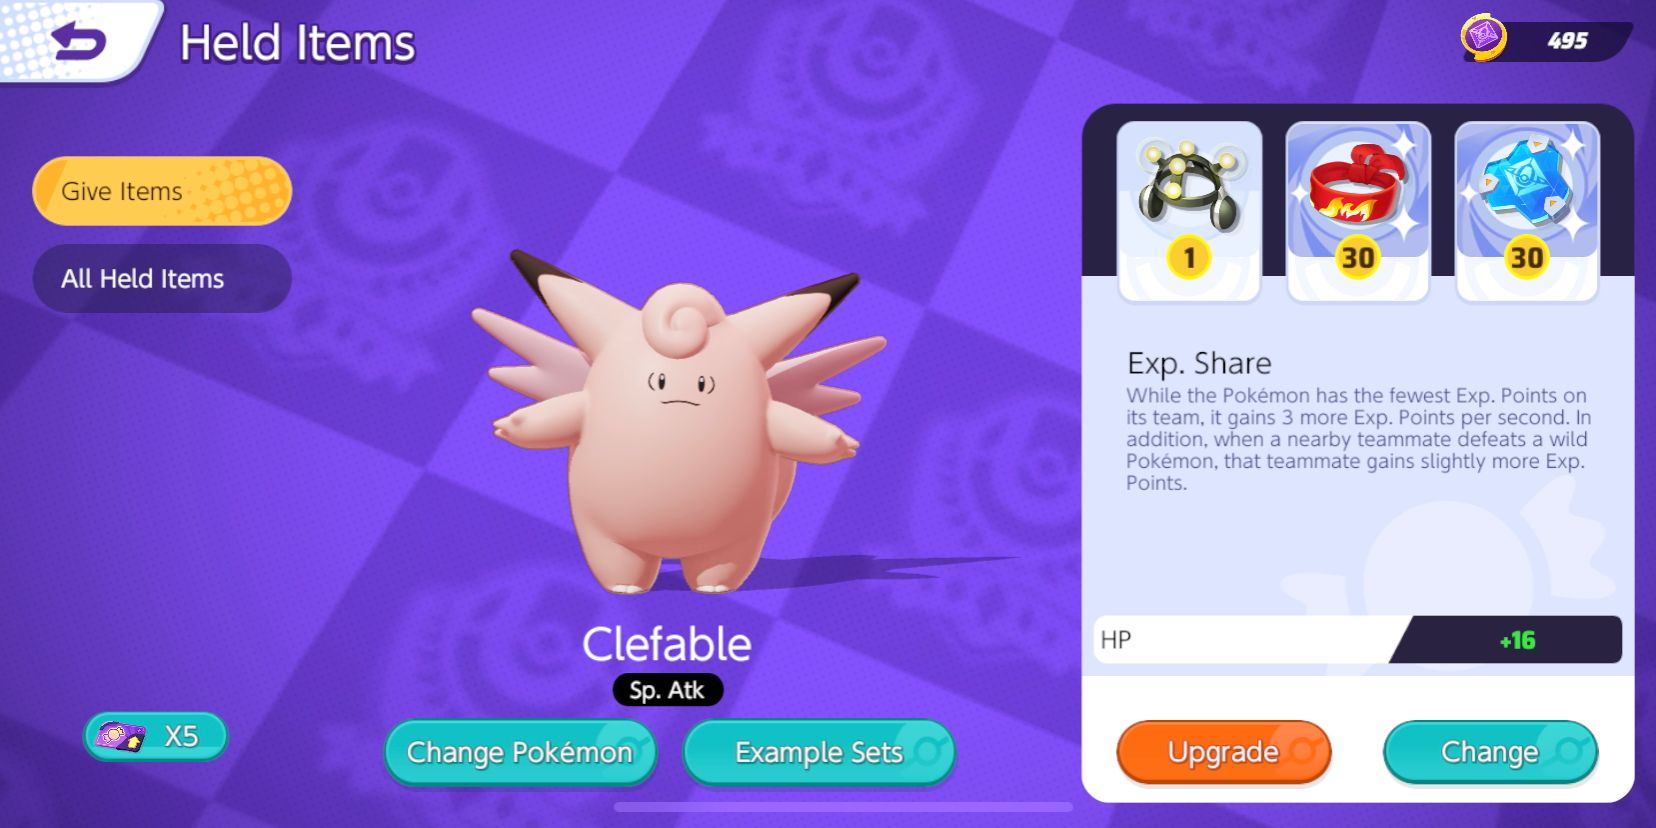 Clefable Held Item customization screen with Exp. Share, Focus Band, and Buddy Barrier equipped